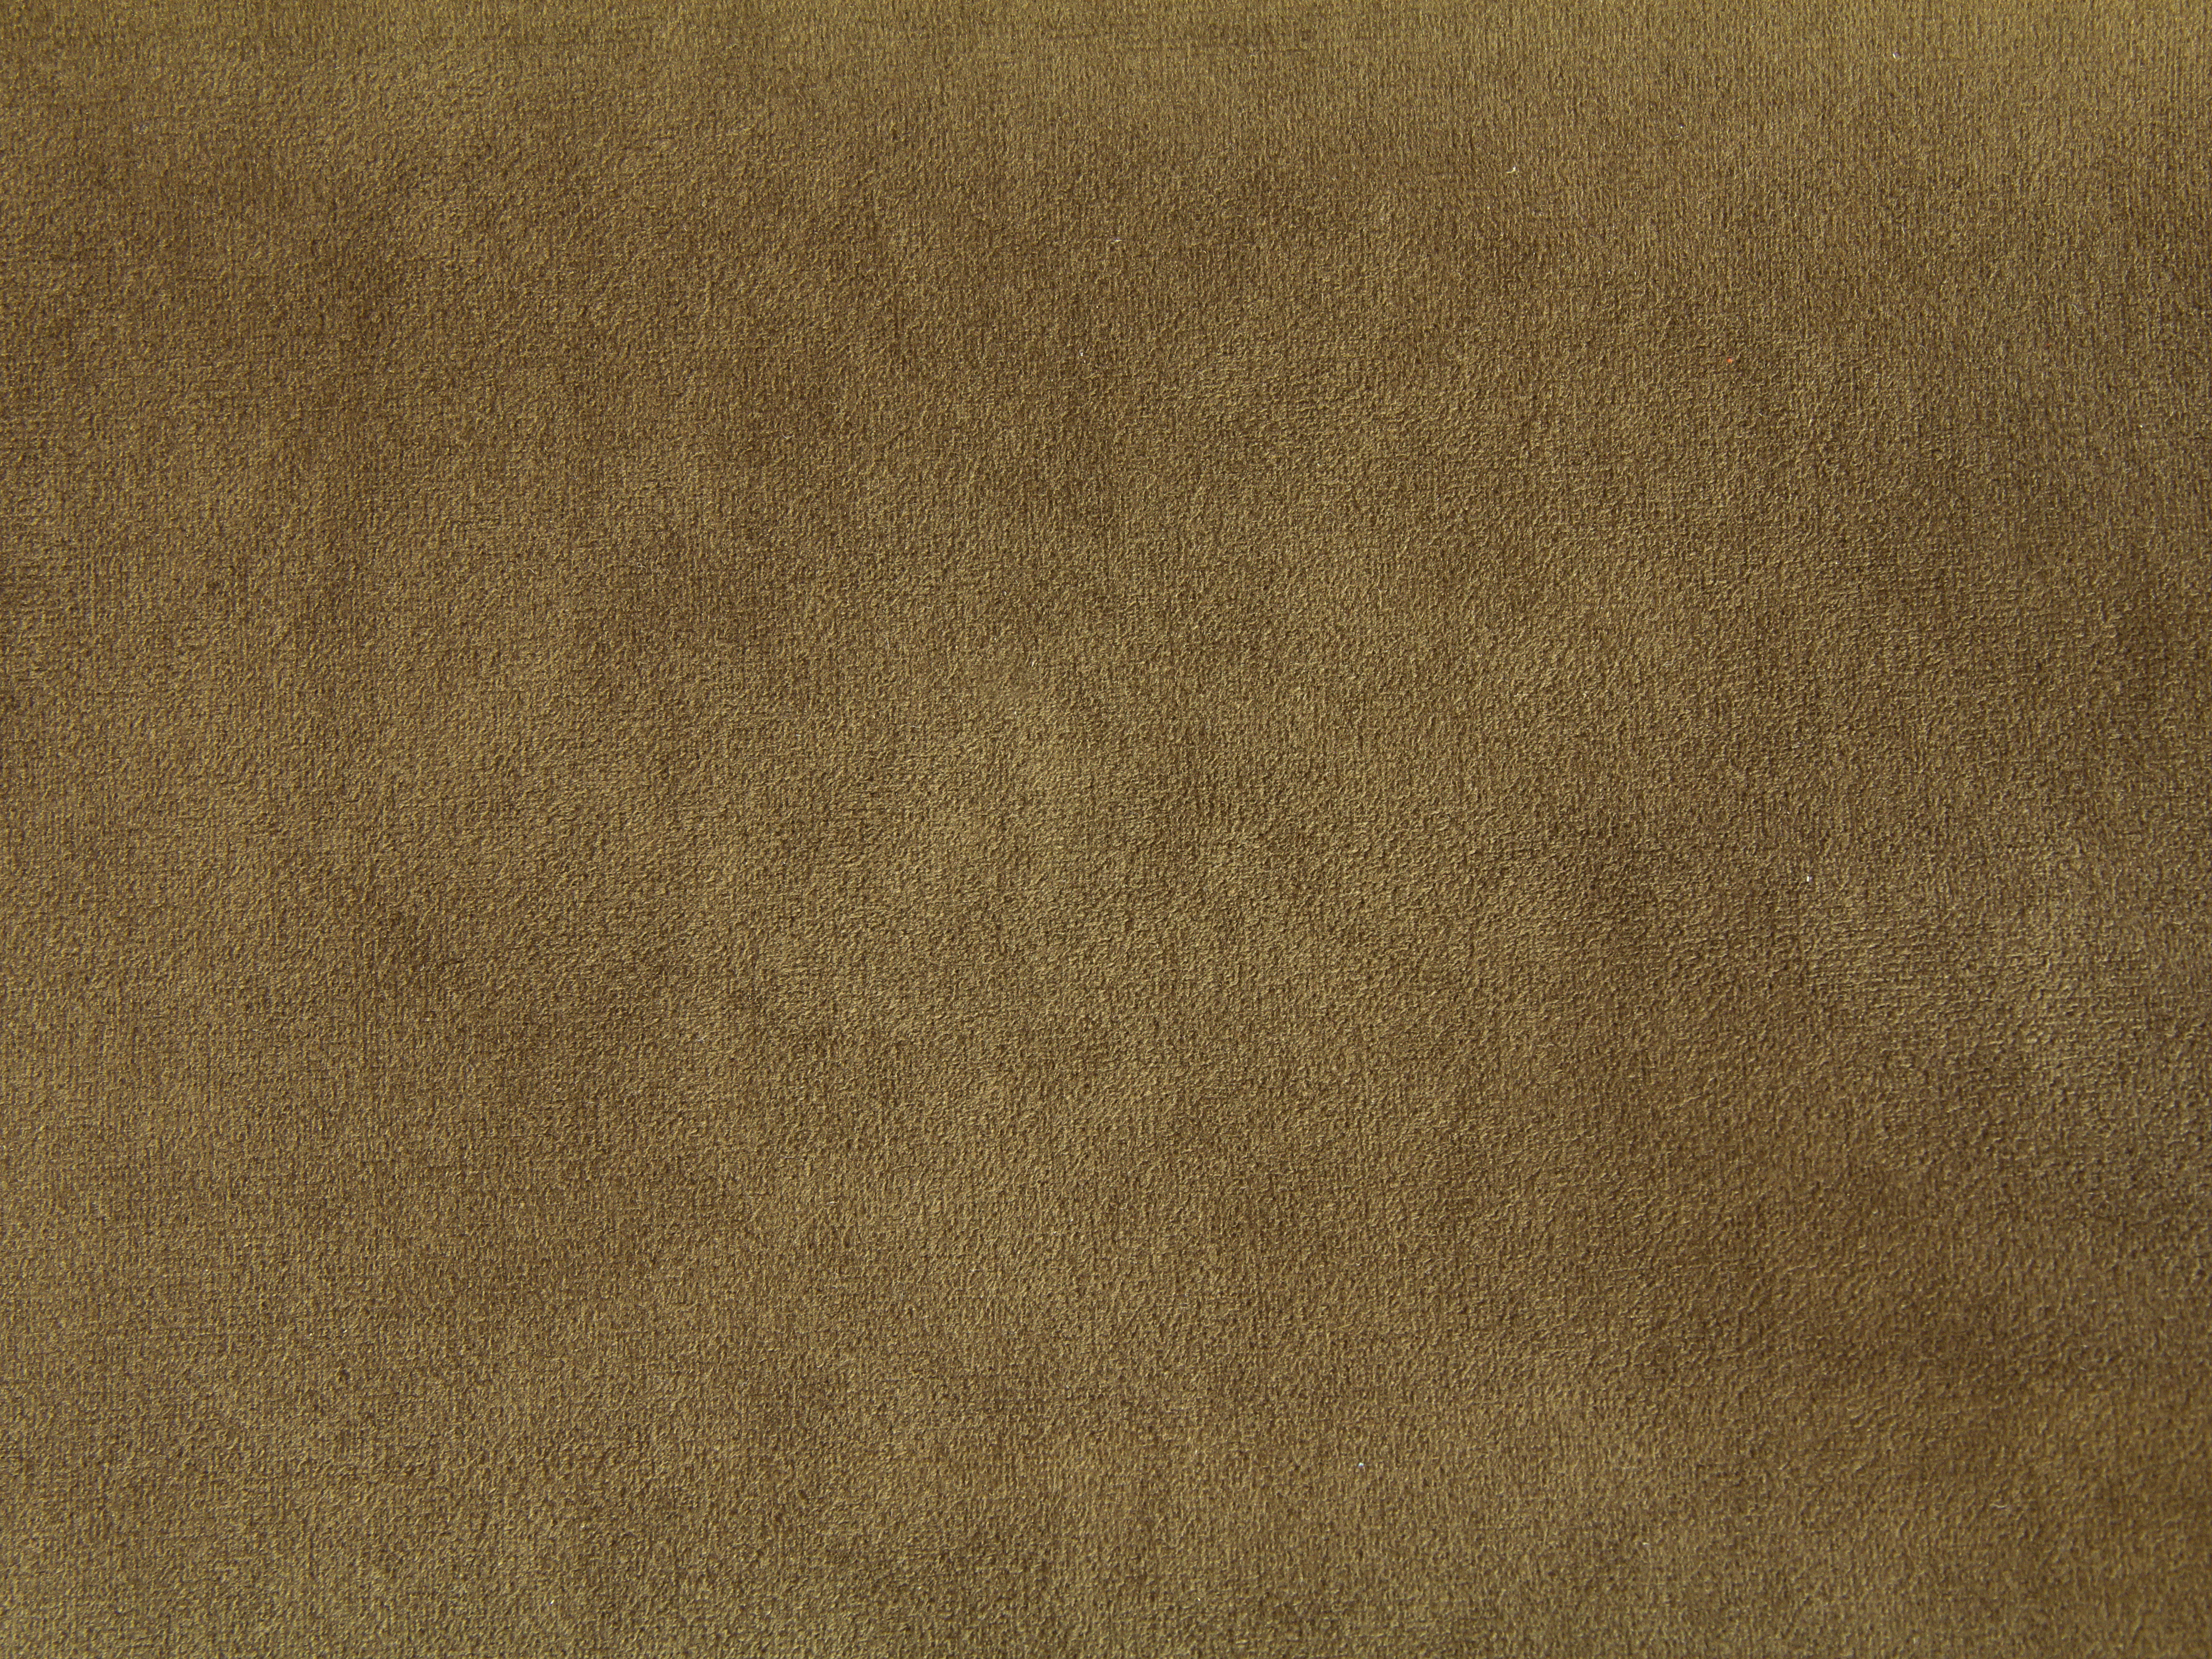 brown fabric fuzzy texture photo soft cloth stock image wallpaper - Texture  X